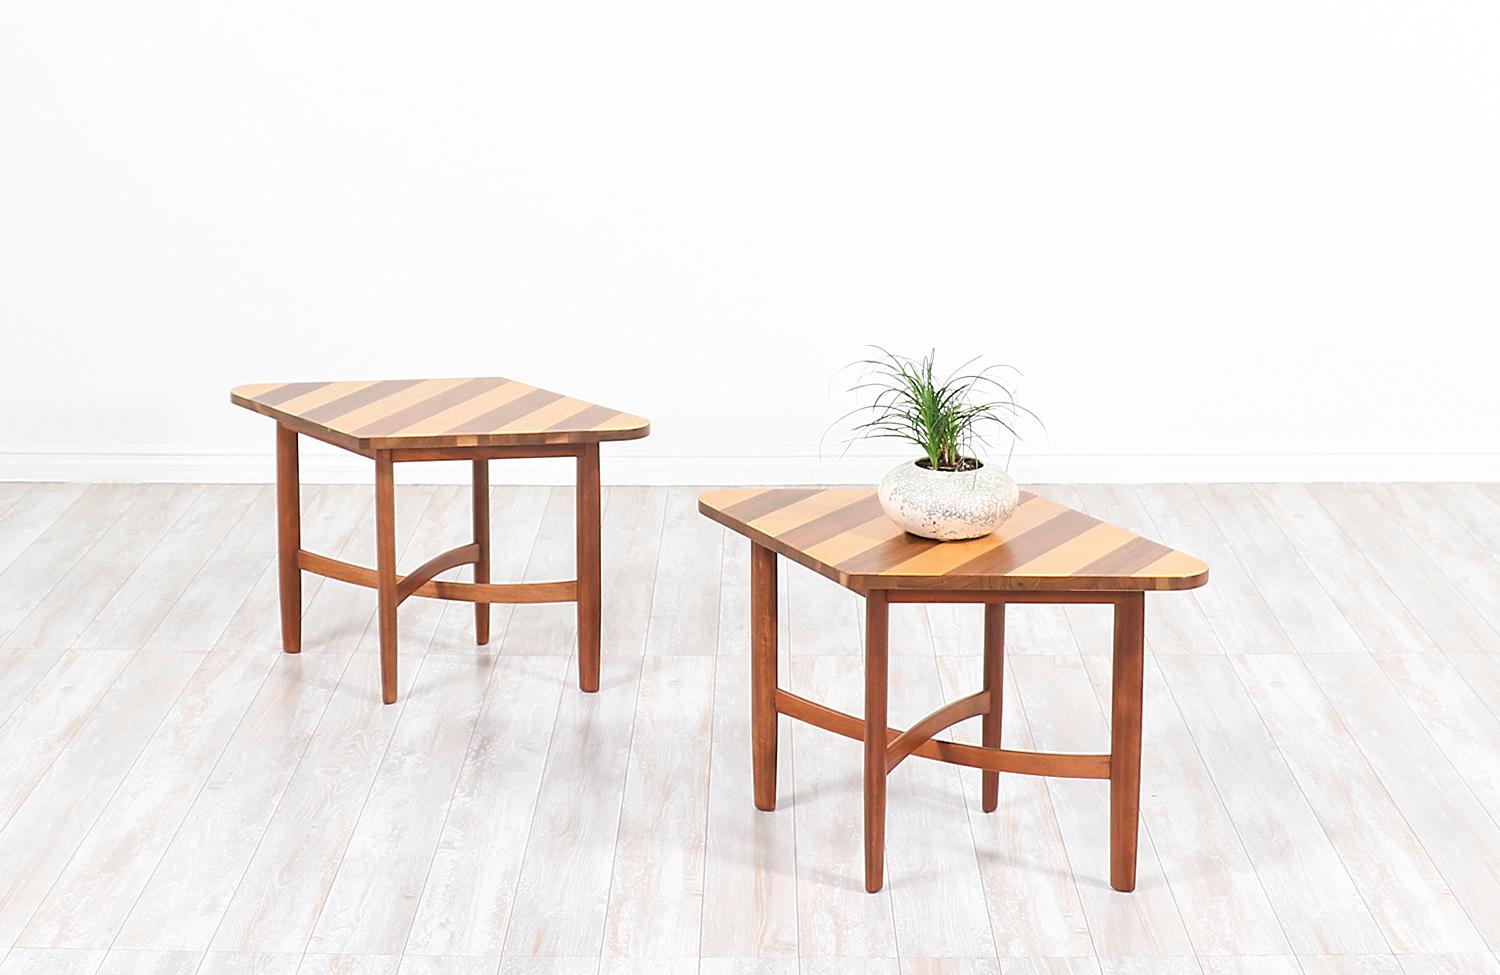 Stylish pair of side tables designed by Barney Flagg for Drexel’s Parallel series and manufactured in the United States, circa 1960s. These rare and eye-catching design is constructed of walnut wood and birch wood with parallel stripes design on